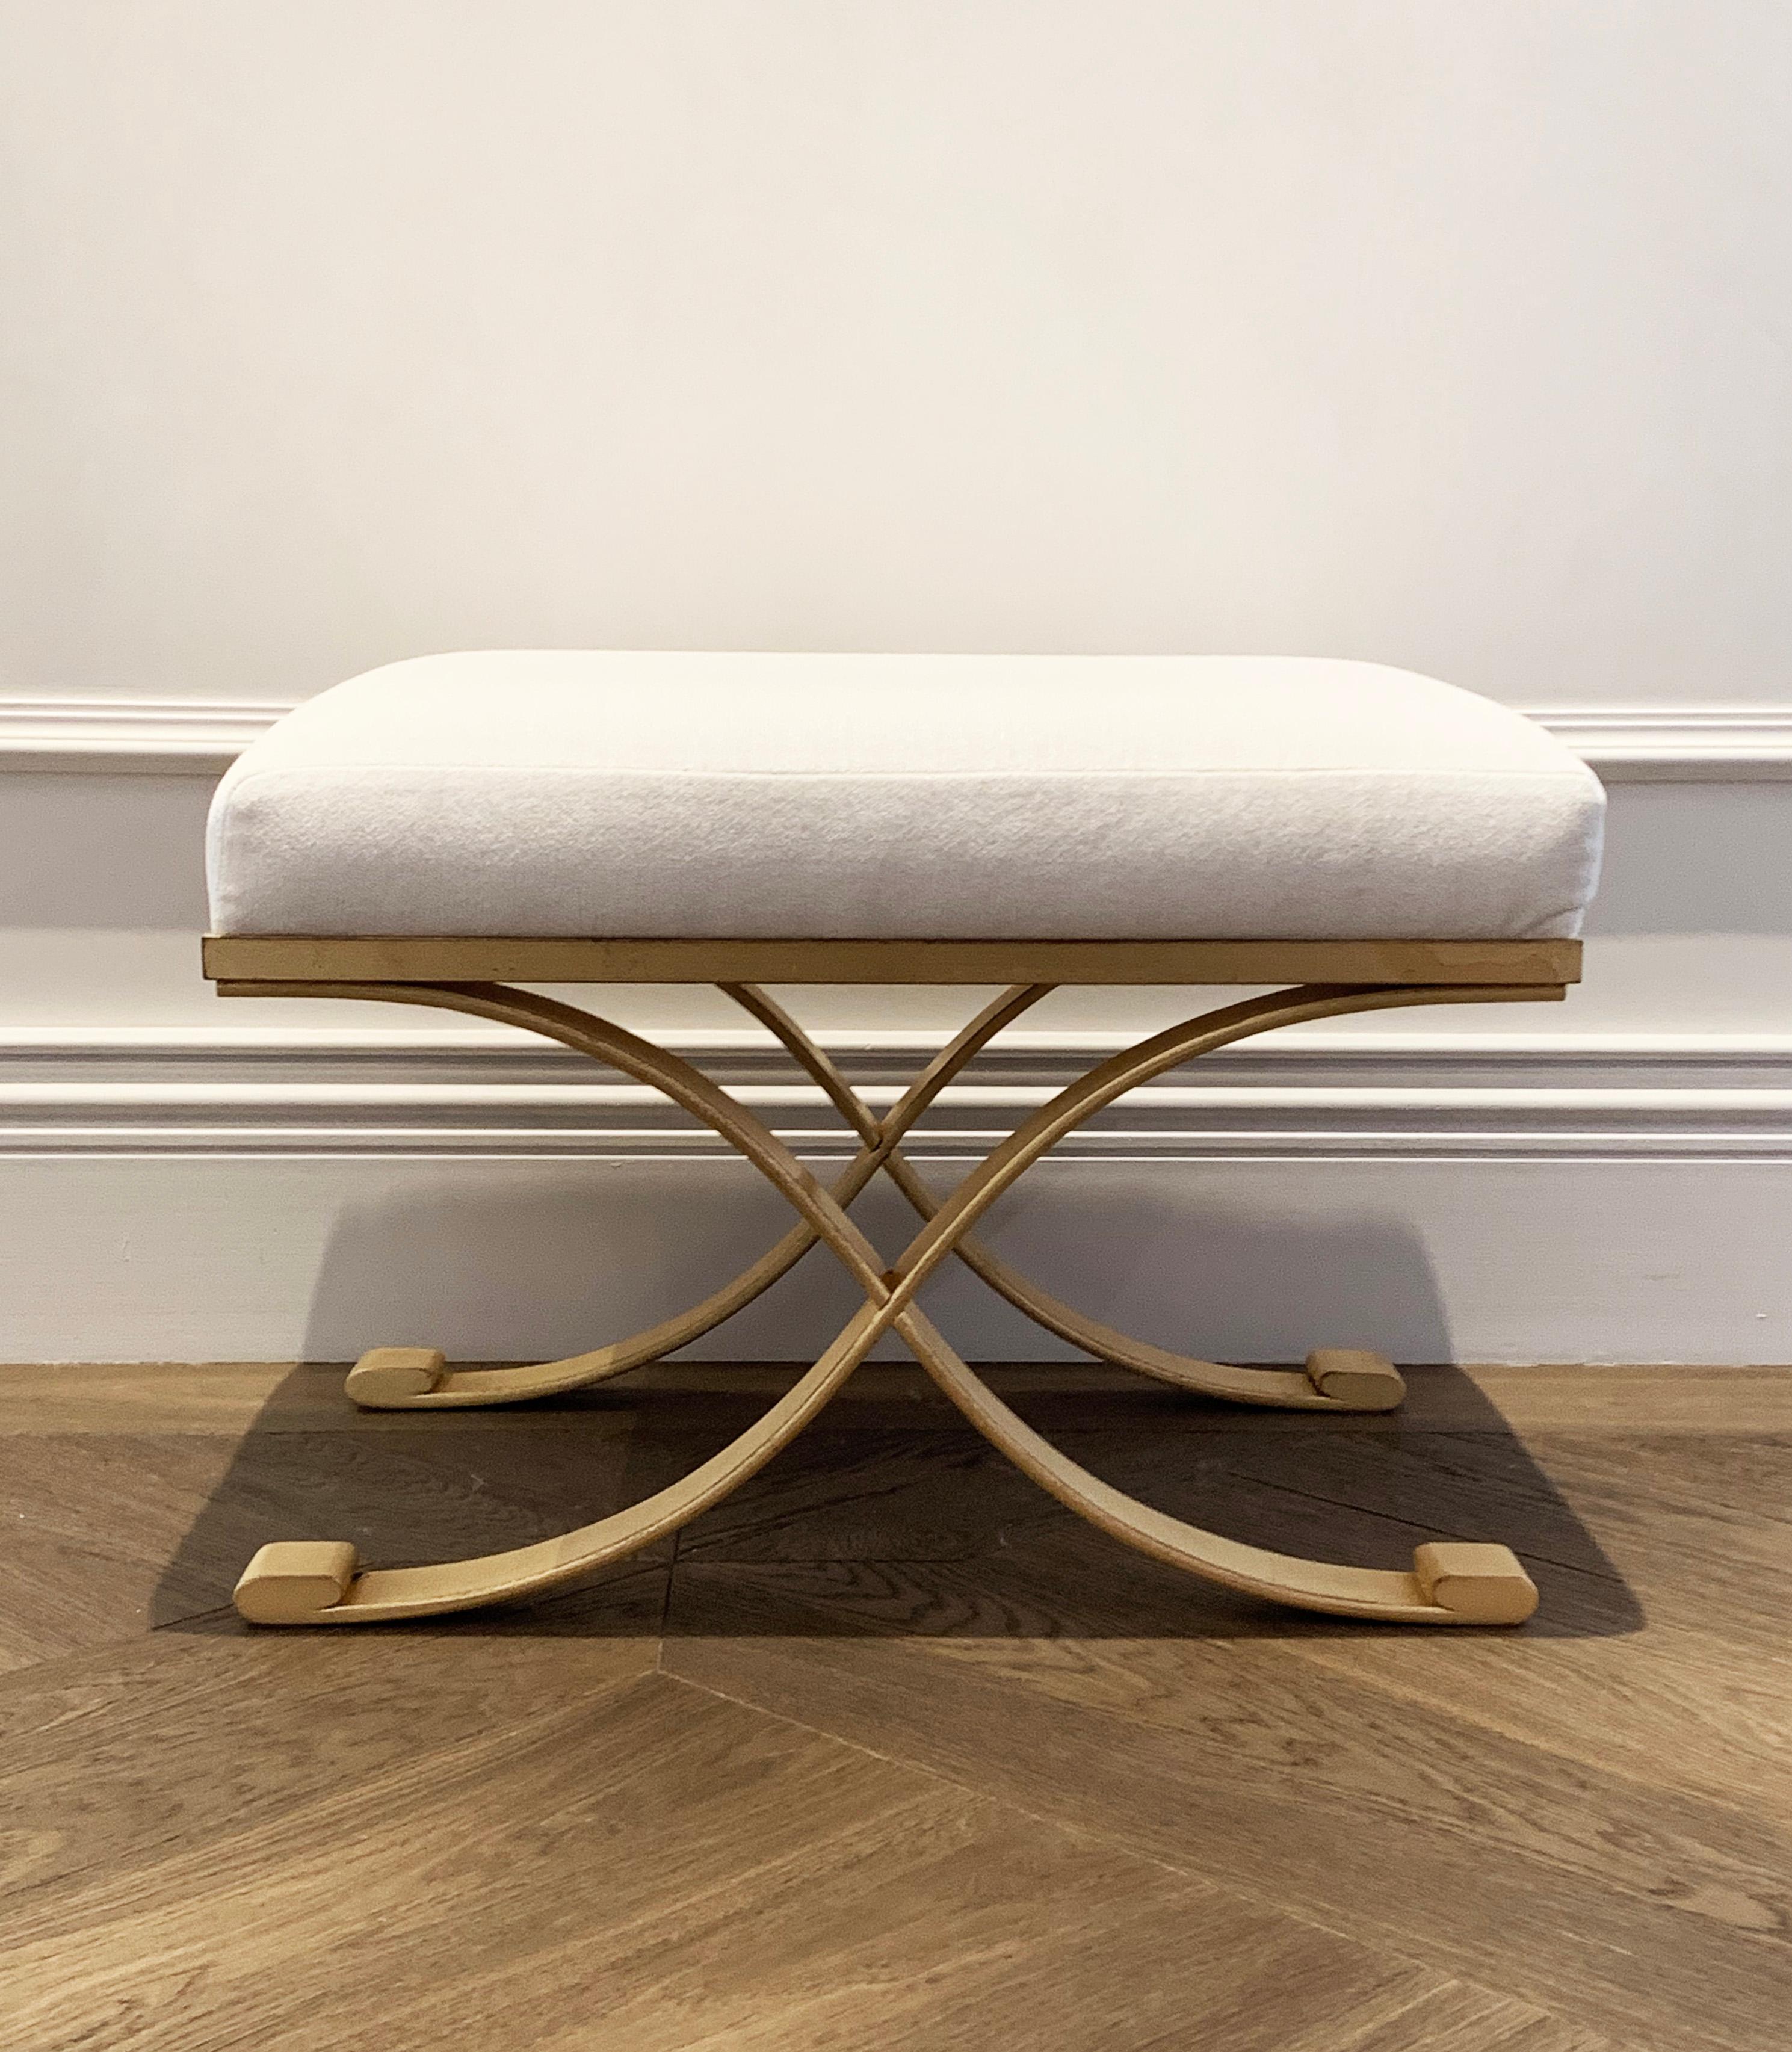 Contemporary Pouenat Neoclassical Gilded Iron Bench, White Velvet Upholstery, Raymond Subes 